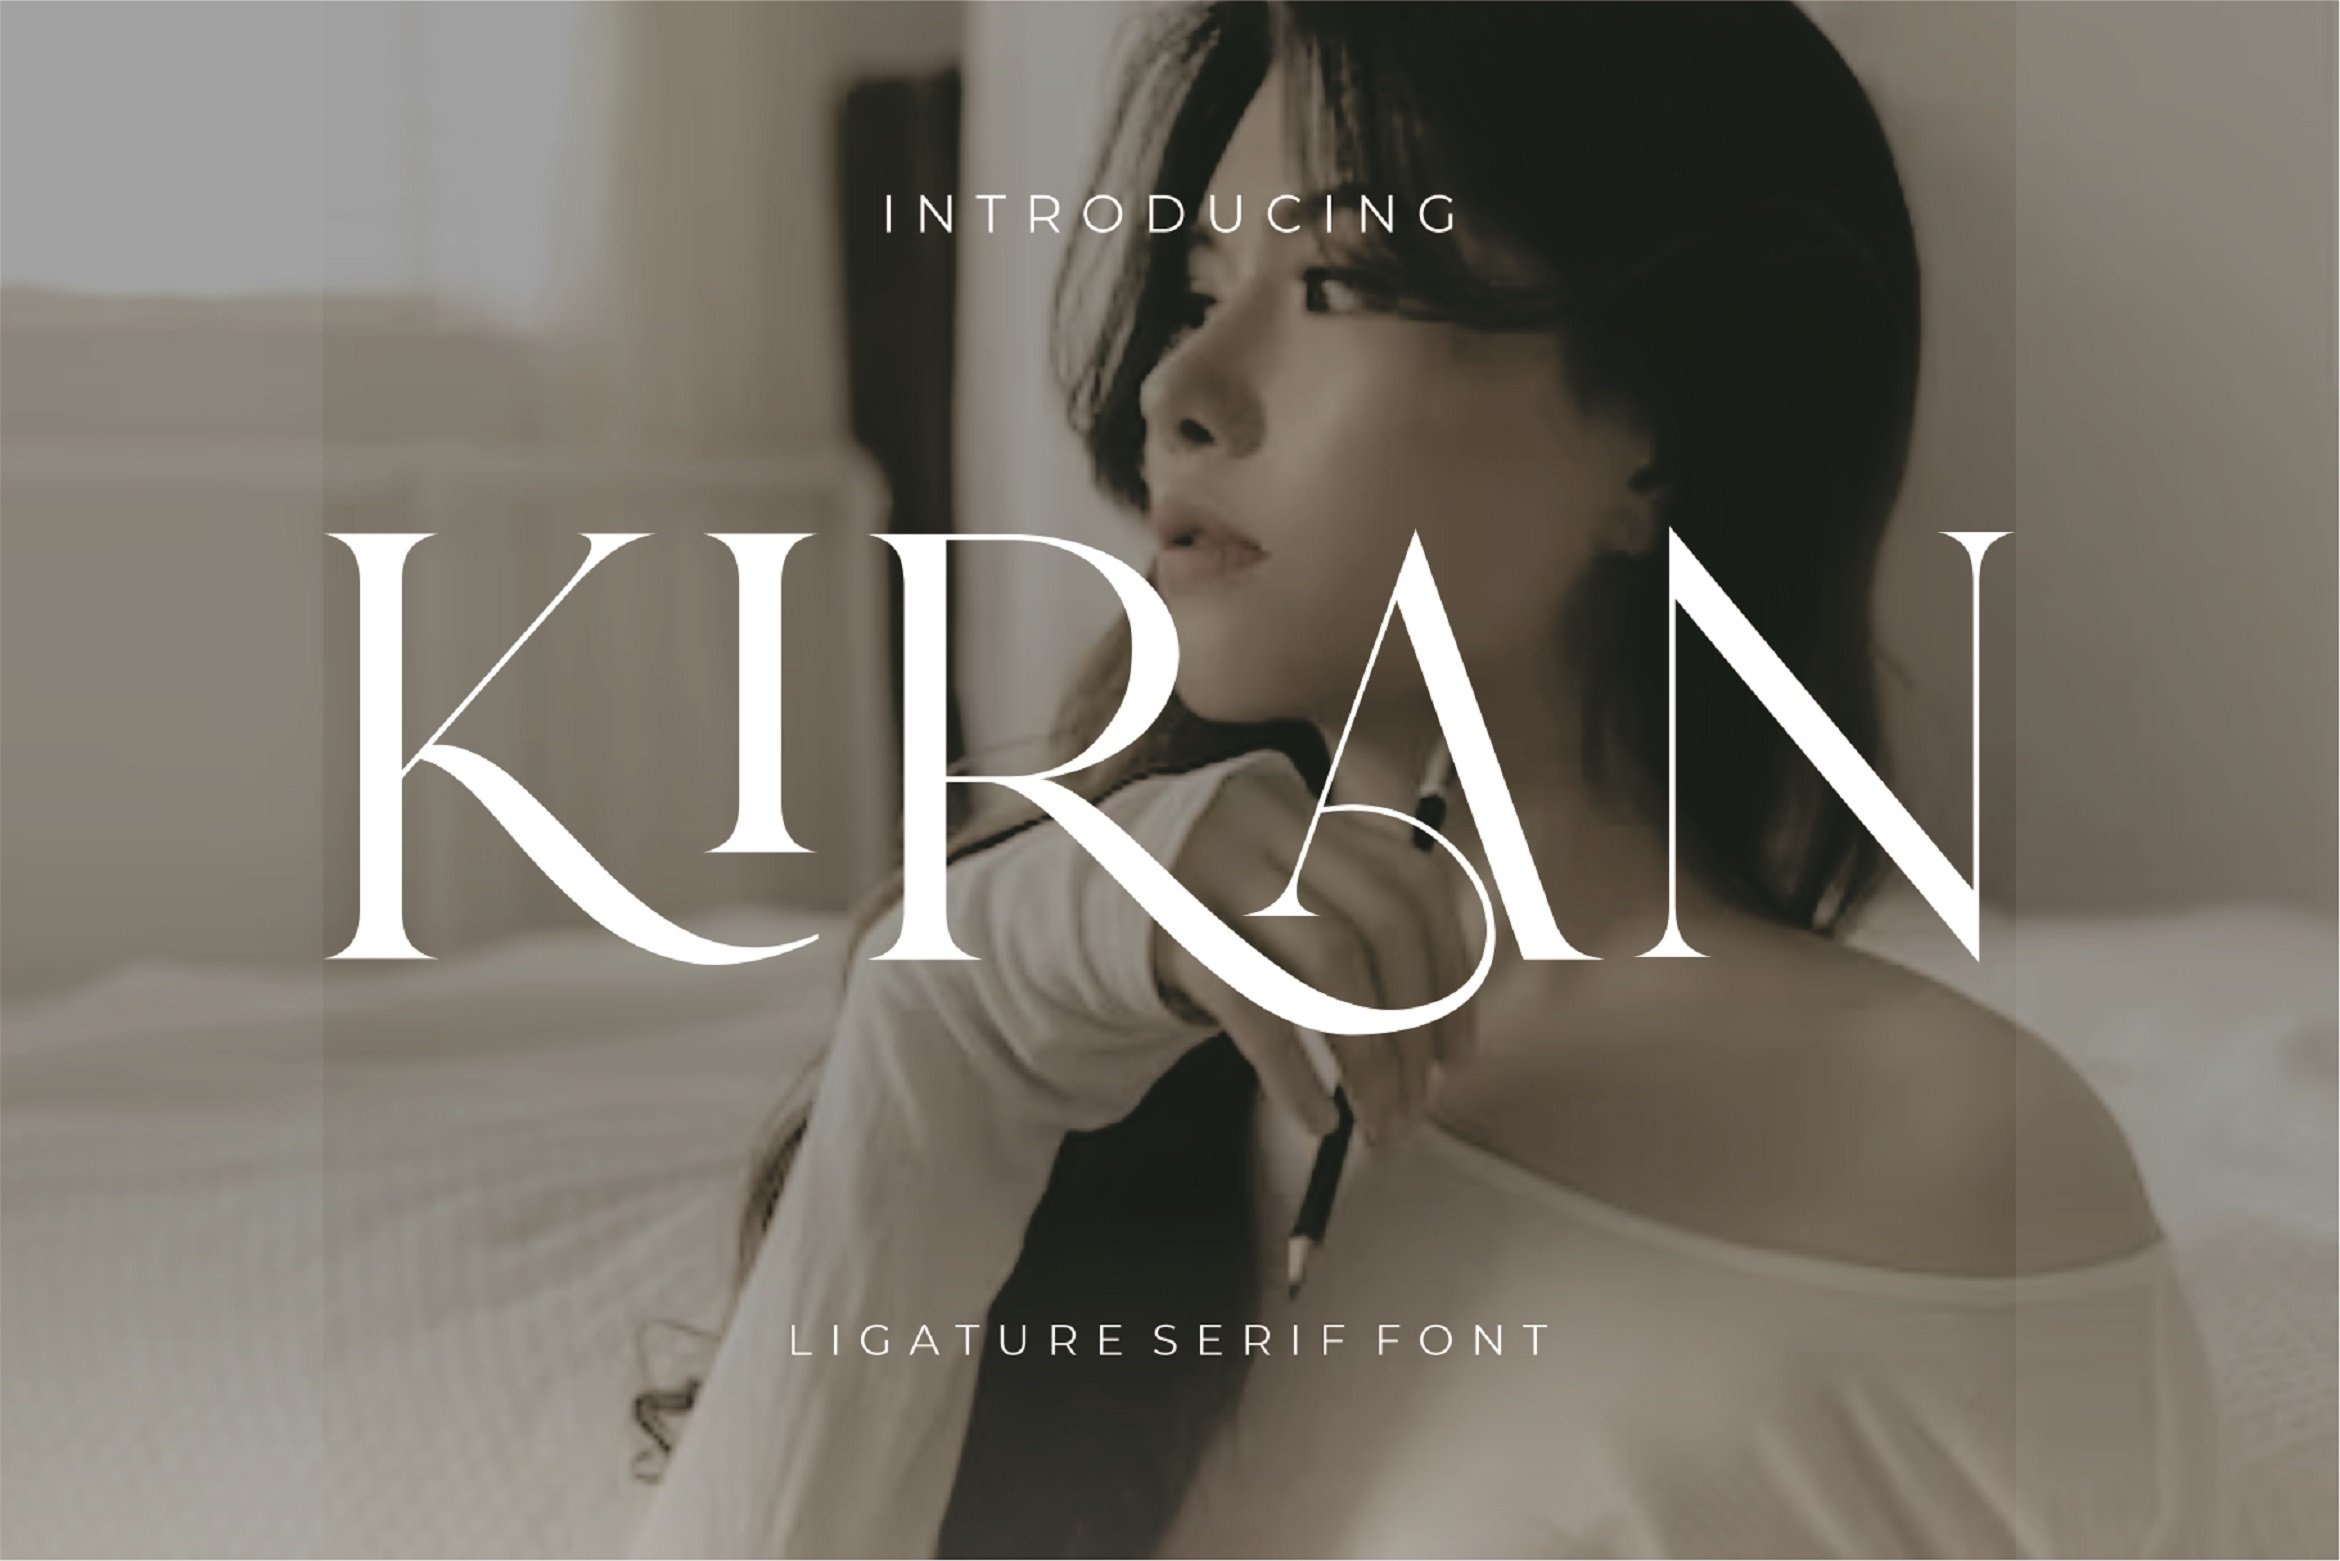 House of Kiran - What's in a name? ⁣⁣⁣ ⁣⁣⁣ 'Kiran', meaning “ray of light”  in Sanskrit, is my middle name. Most Punjabi-Sikh girls have 'Kaur'  (meaning “princess”) as their middle name.